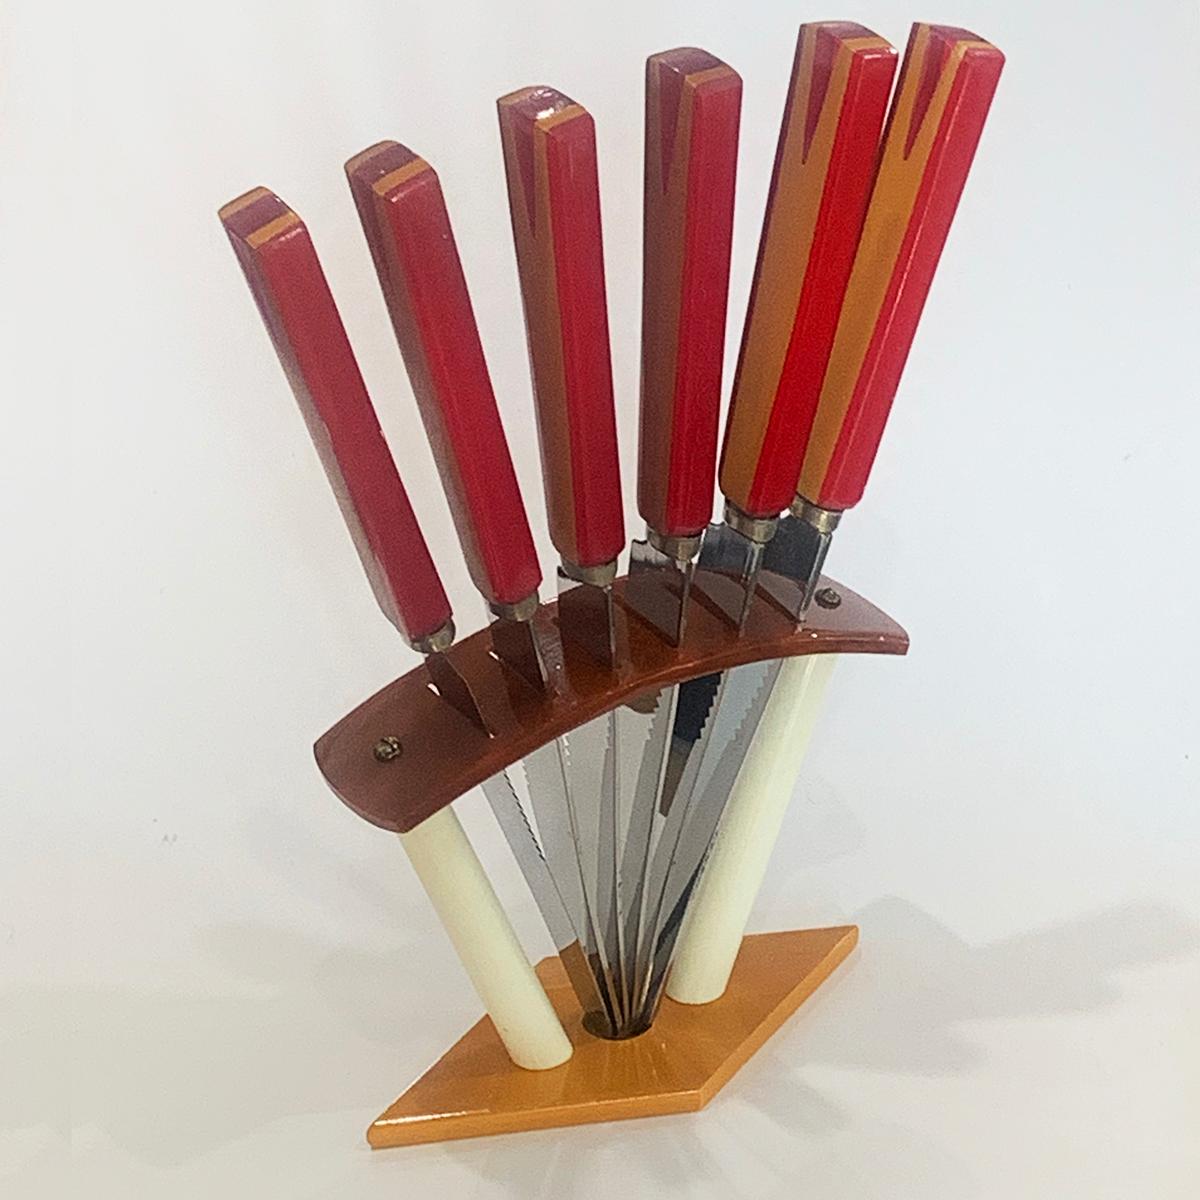 Art Deco German bakelite fruit knife set, of 6, with fantastic translucent red bakelite handles spliced with orange, on the original geometric bakelite stand in white and brown Bakelite. All in excellent condition and the stainless steel blades are